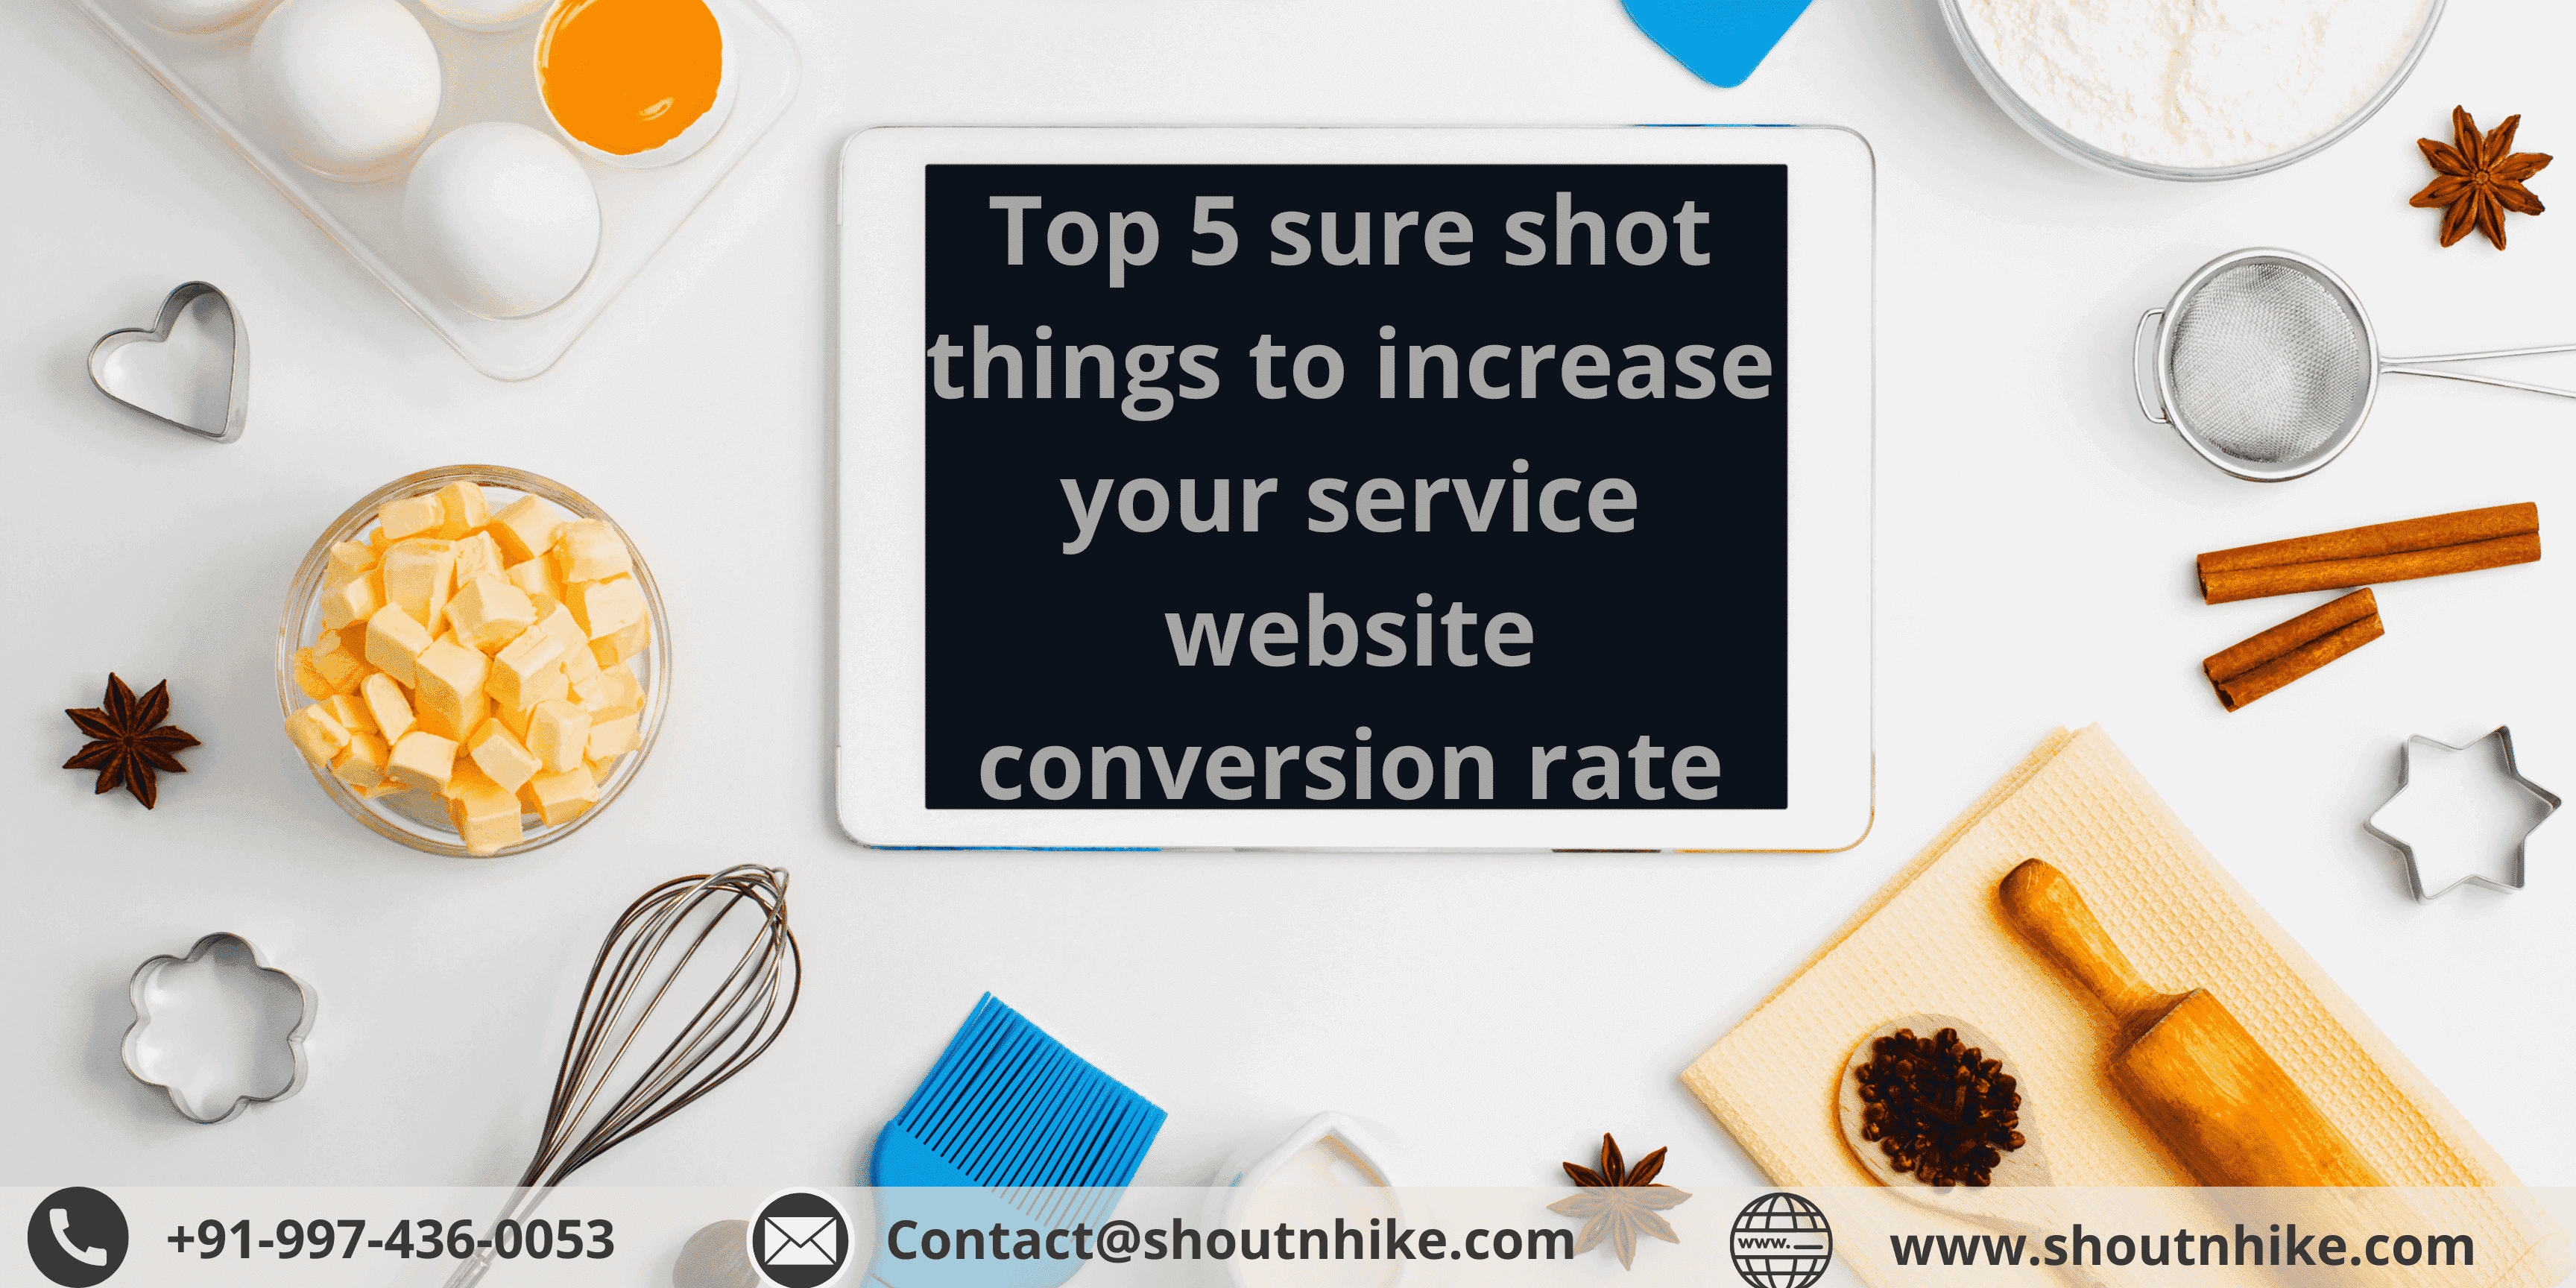 Top 5 sure shot things to increase your service website conversion rate.